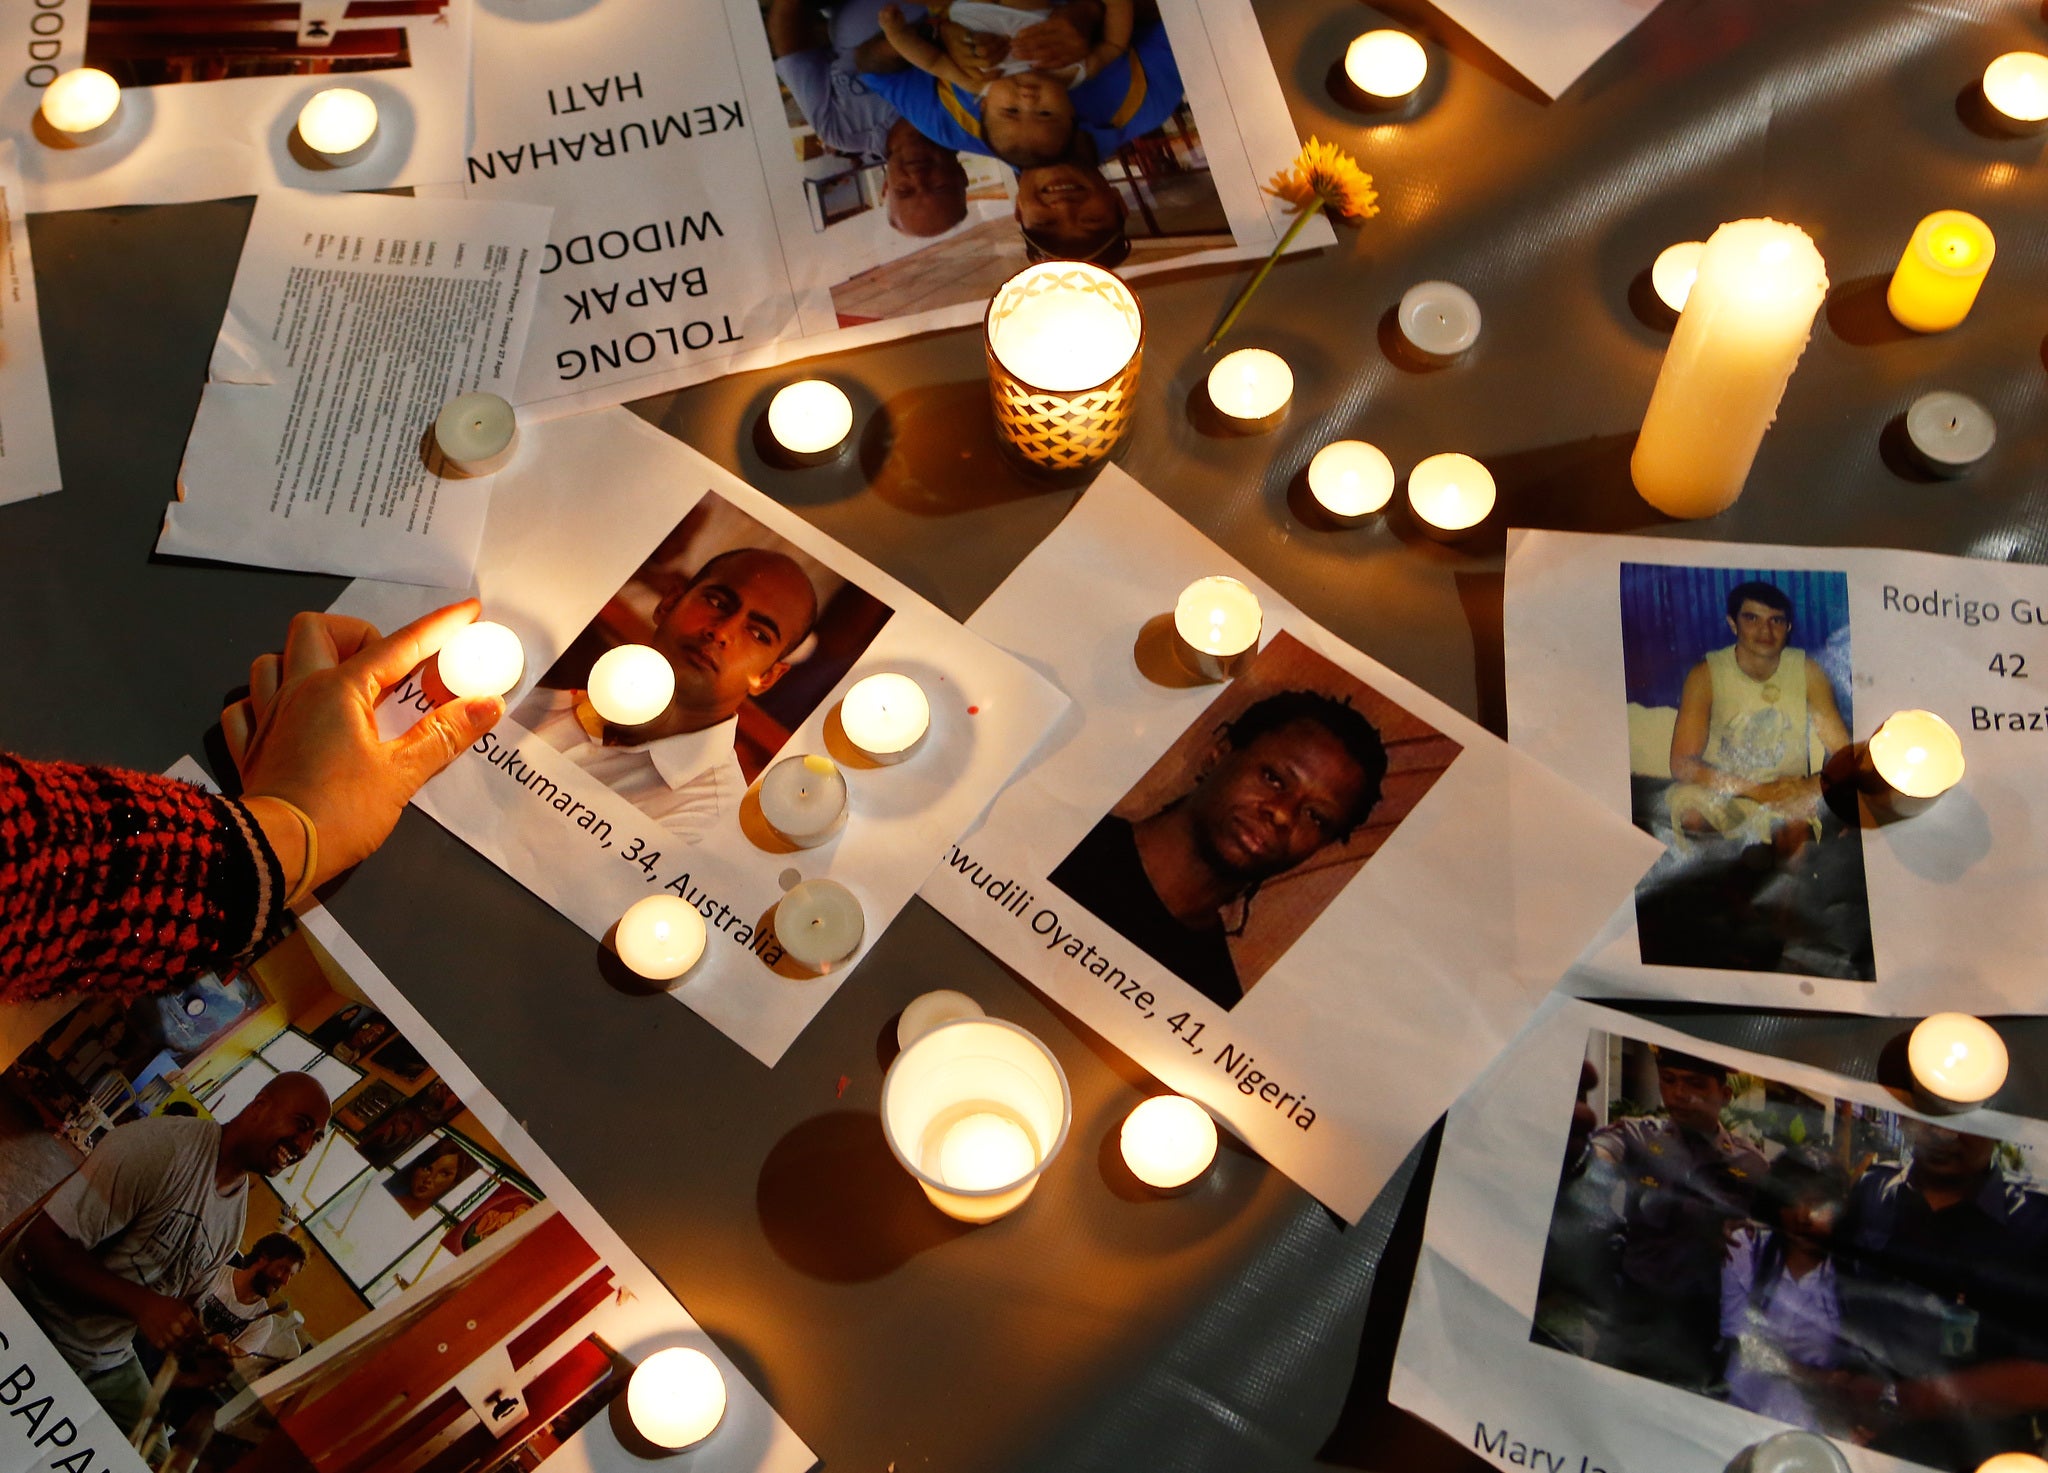 A woman places a candle on top of pictures of the prisoners to be executed in Indonesia, during a vigil at Martin Place in Sydney, Australia